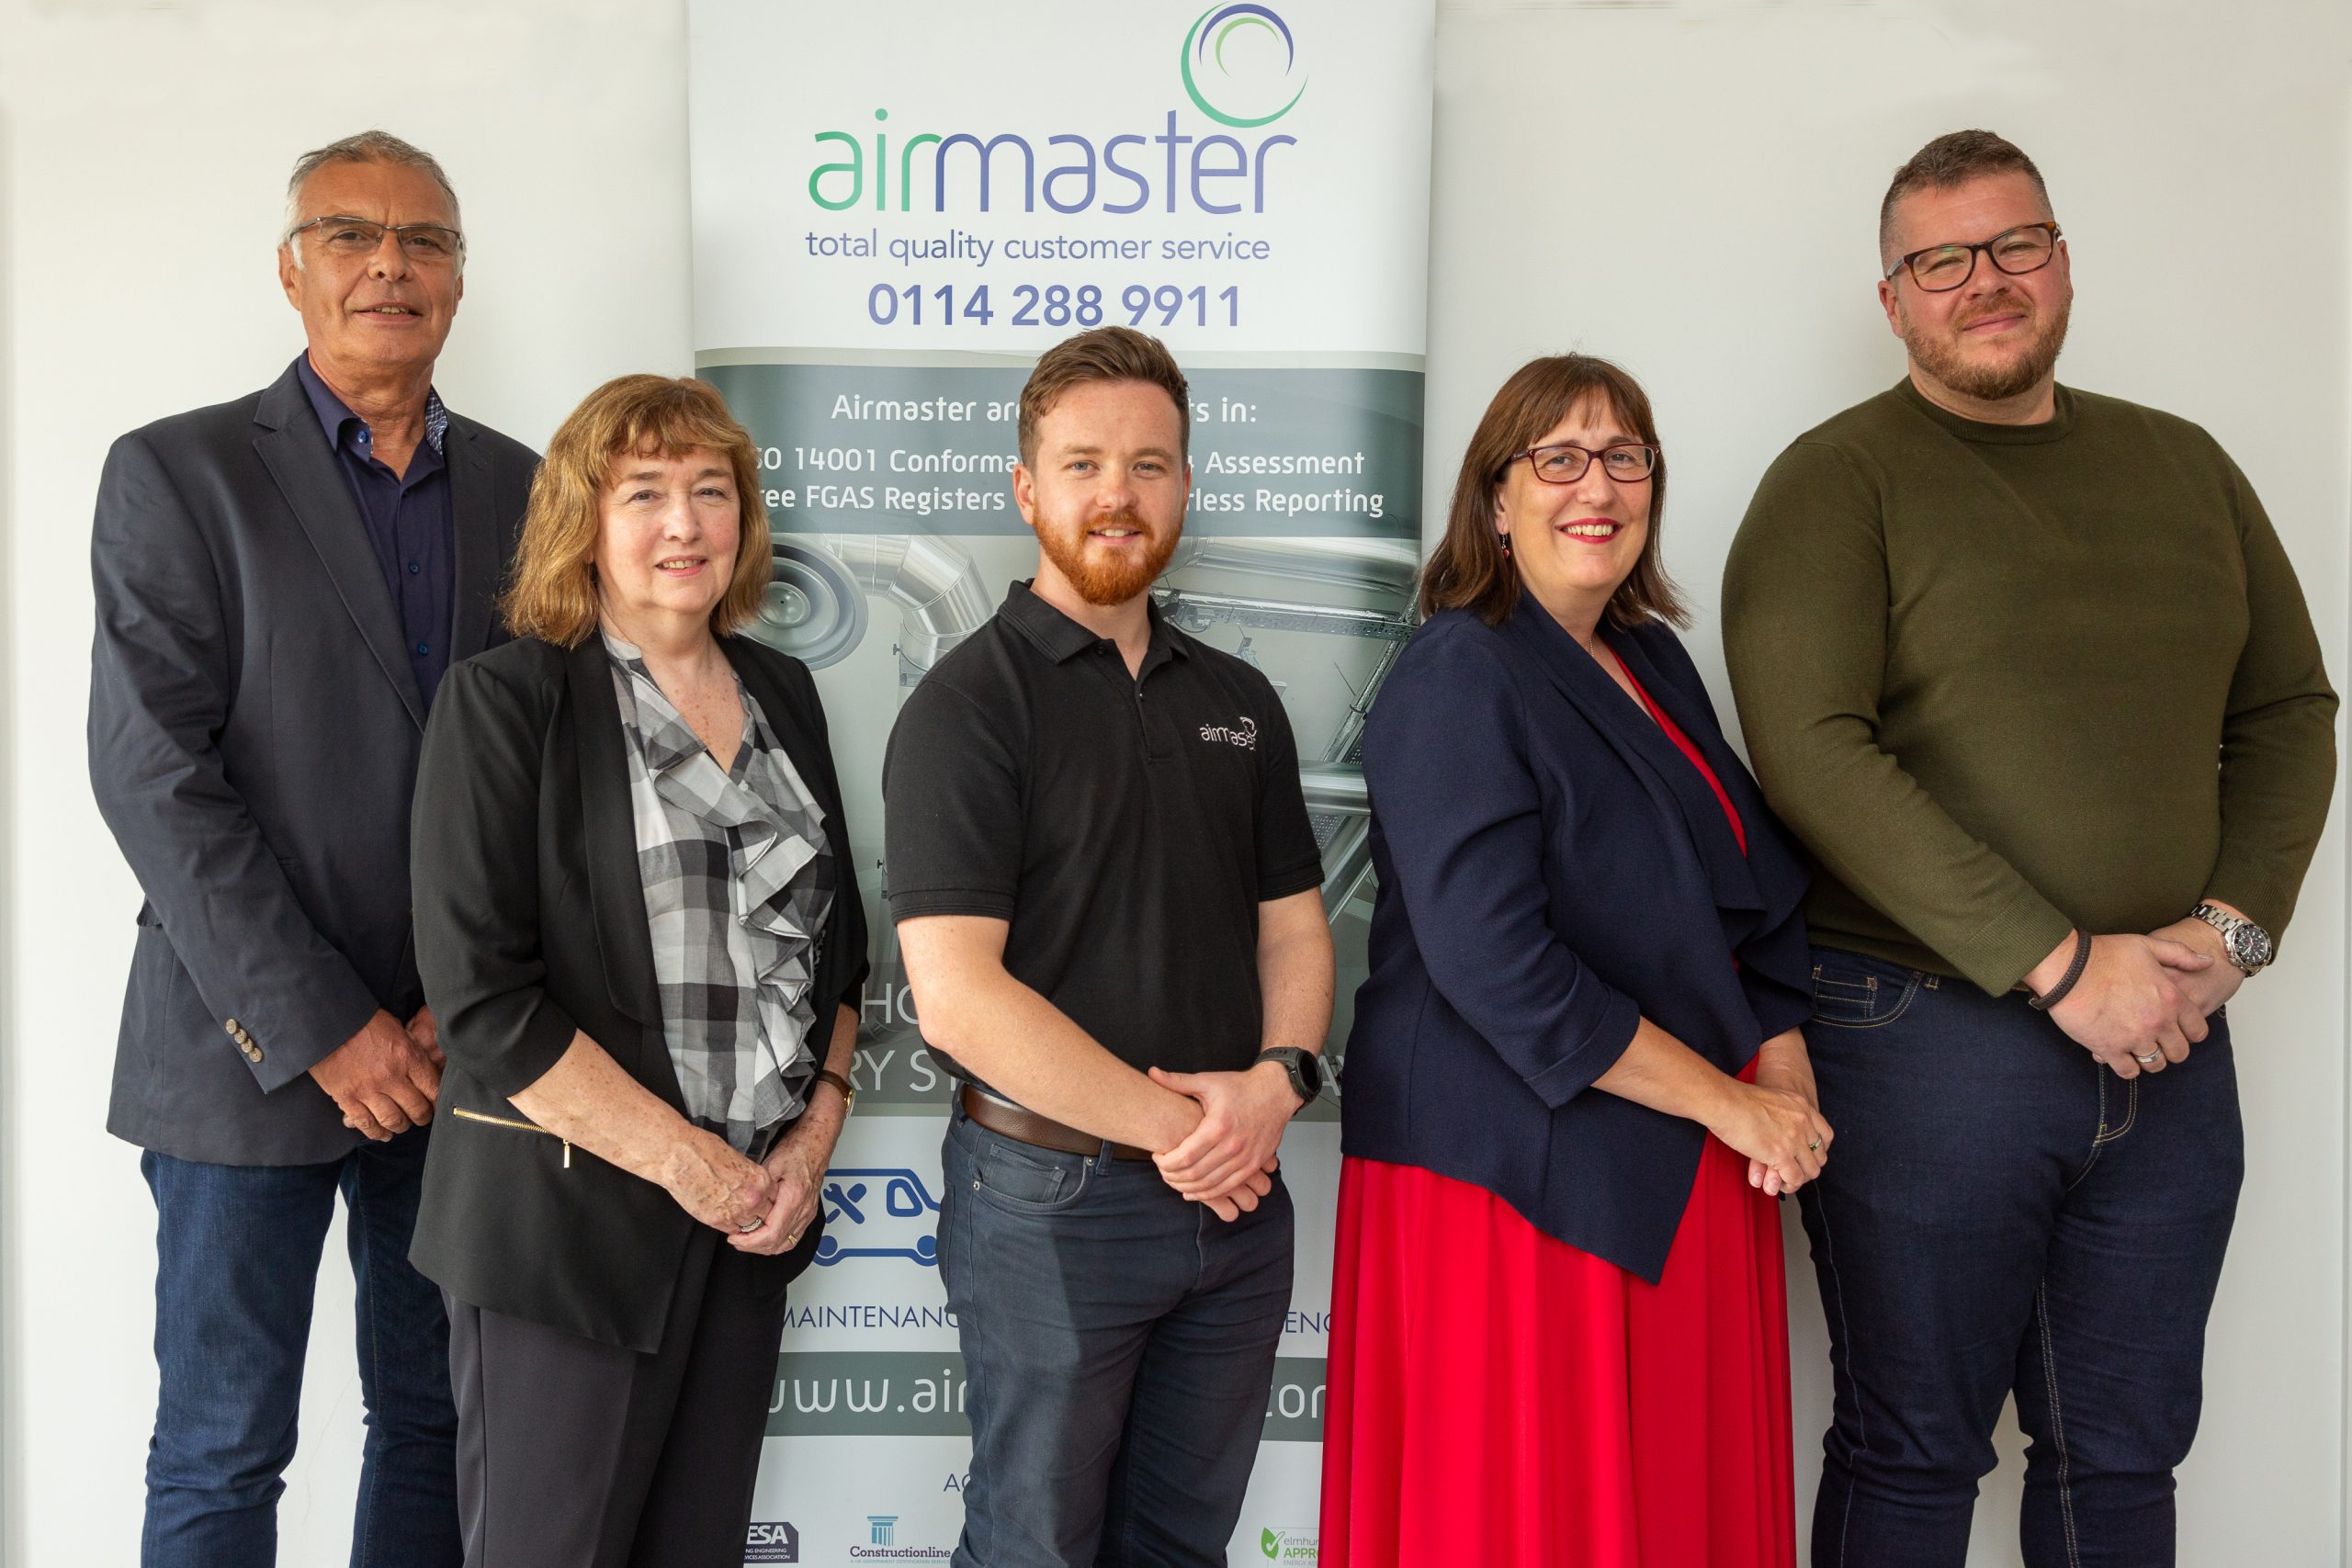 Employees become beneficiaries of an Employee Owned Trust at Airmaster!